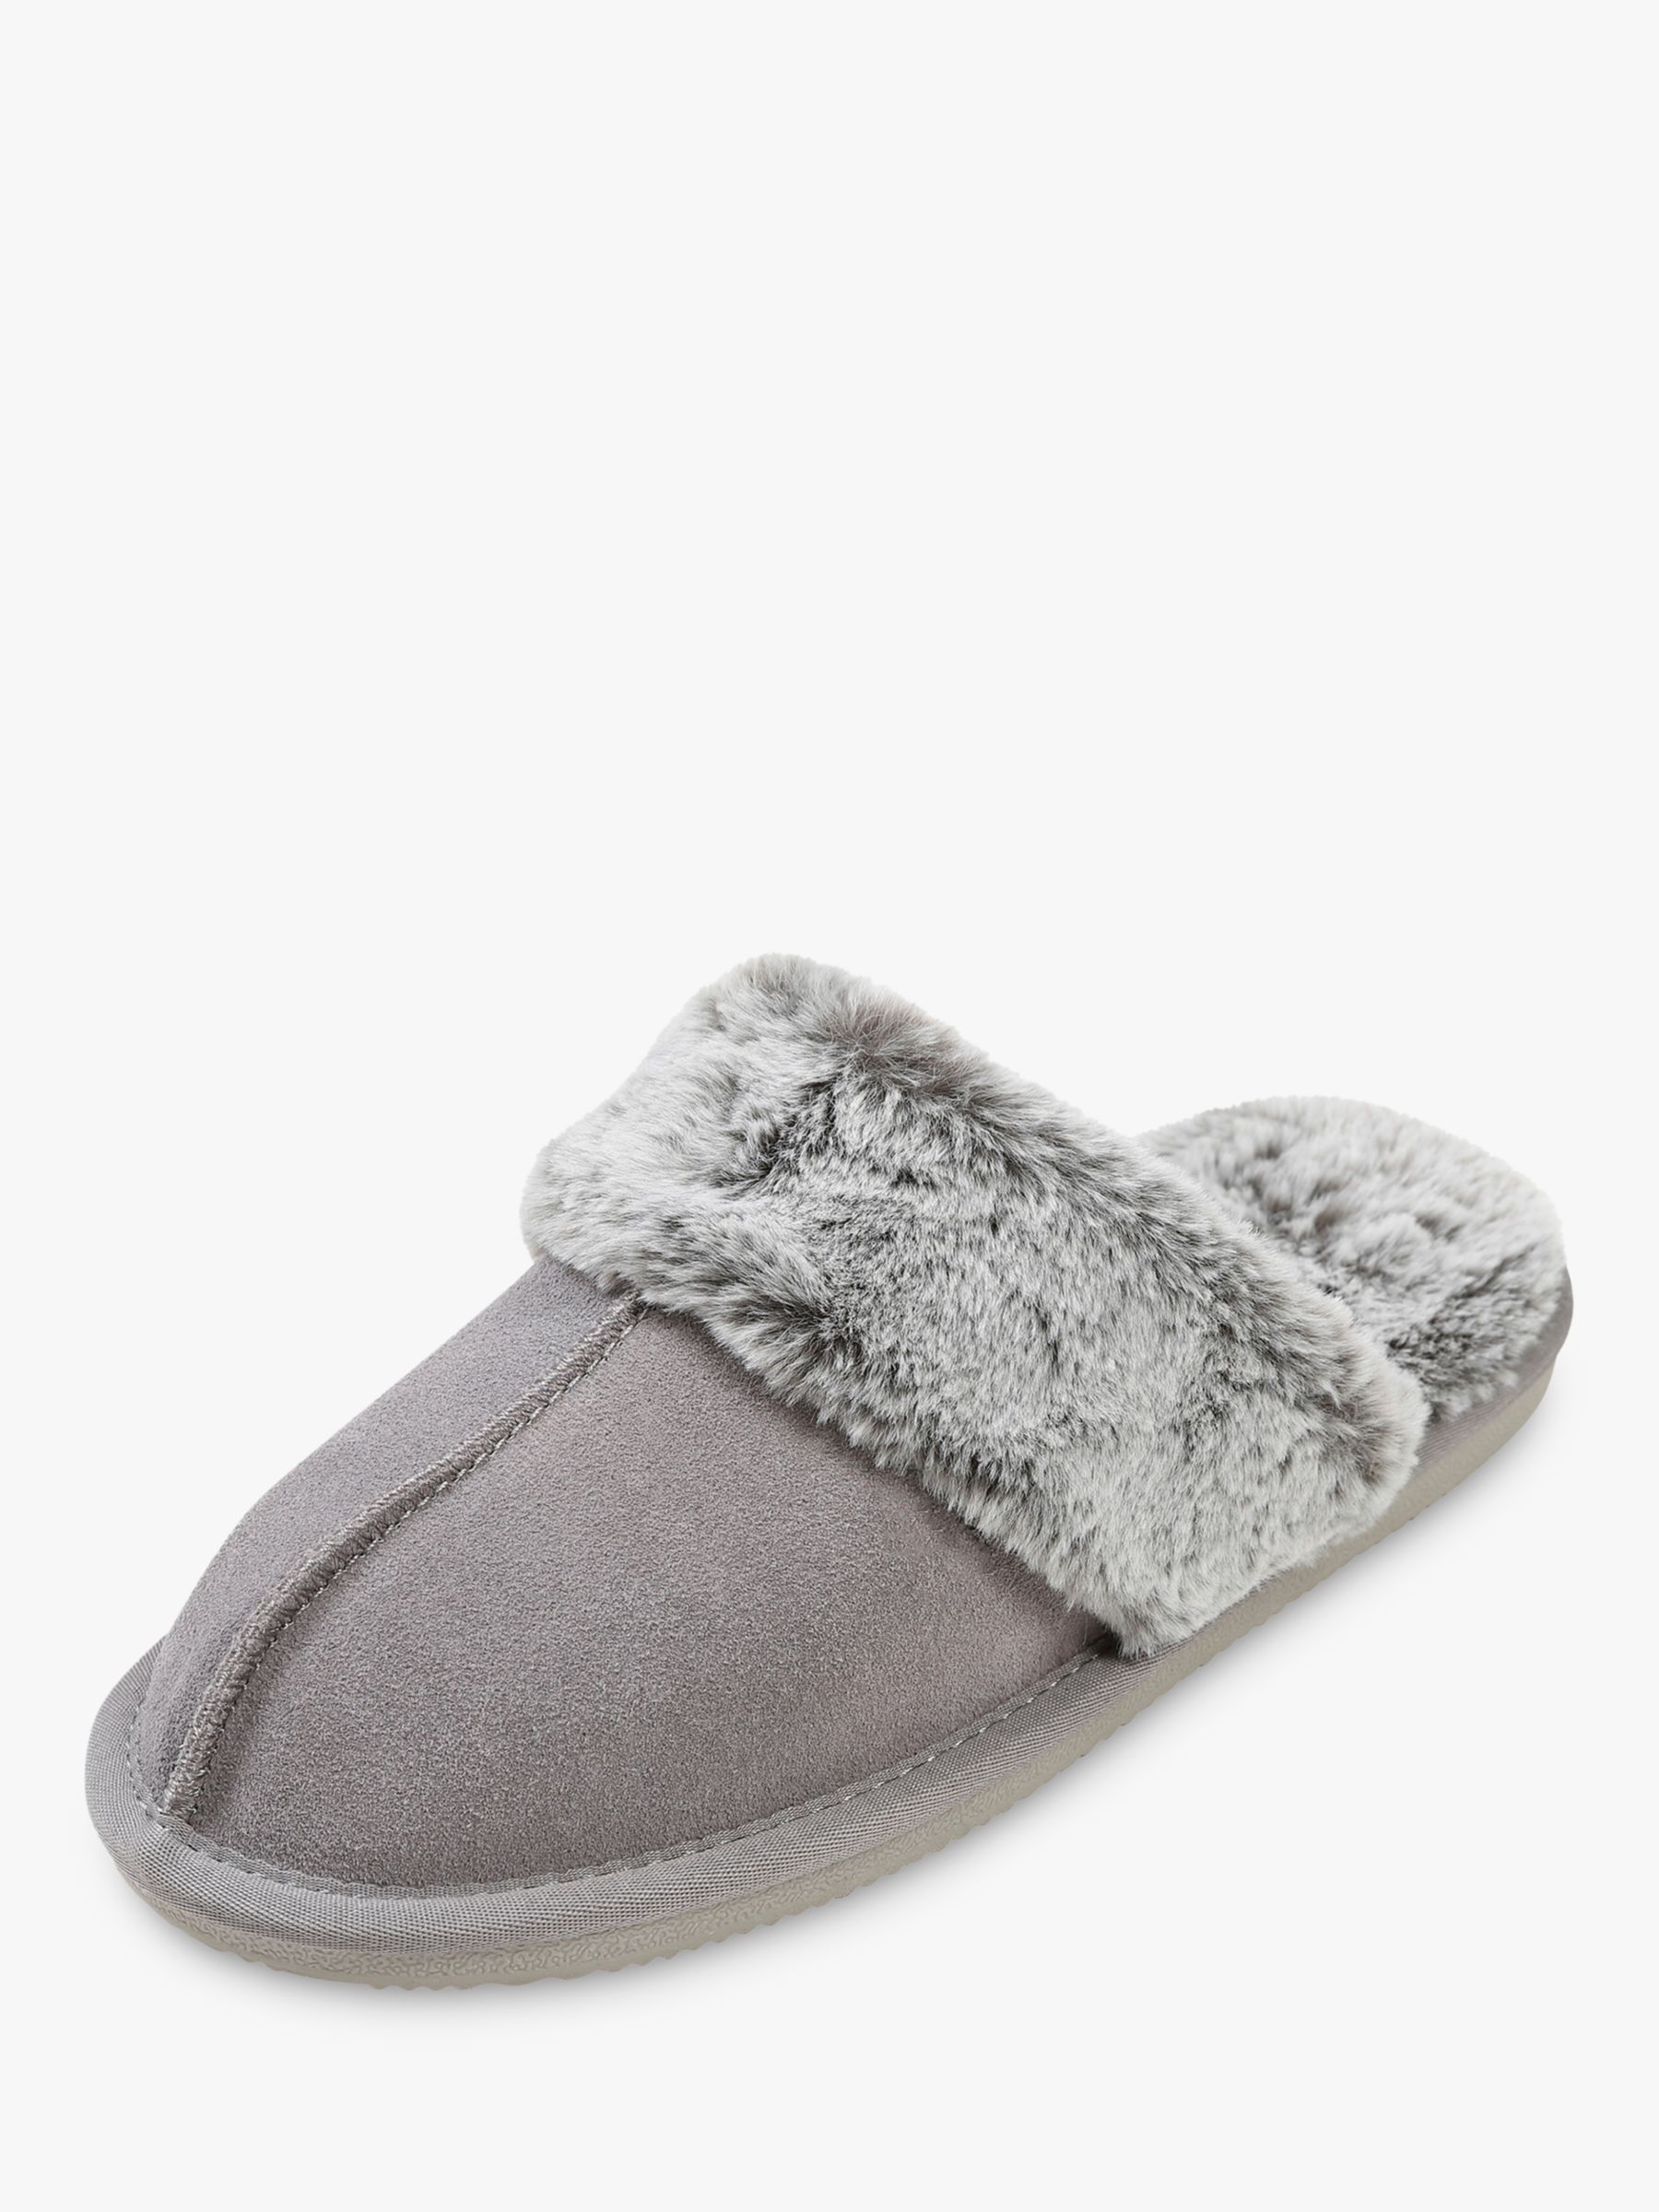 HotSquash Suede and Leather Slip-On Slippers, Silver Grey at John Lewis ...